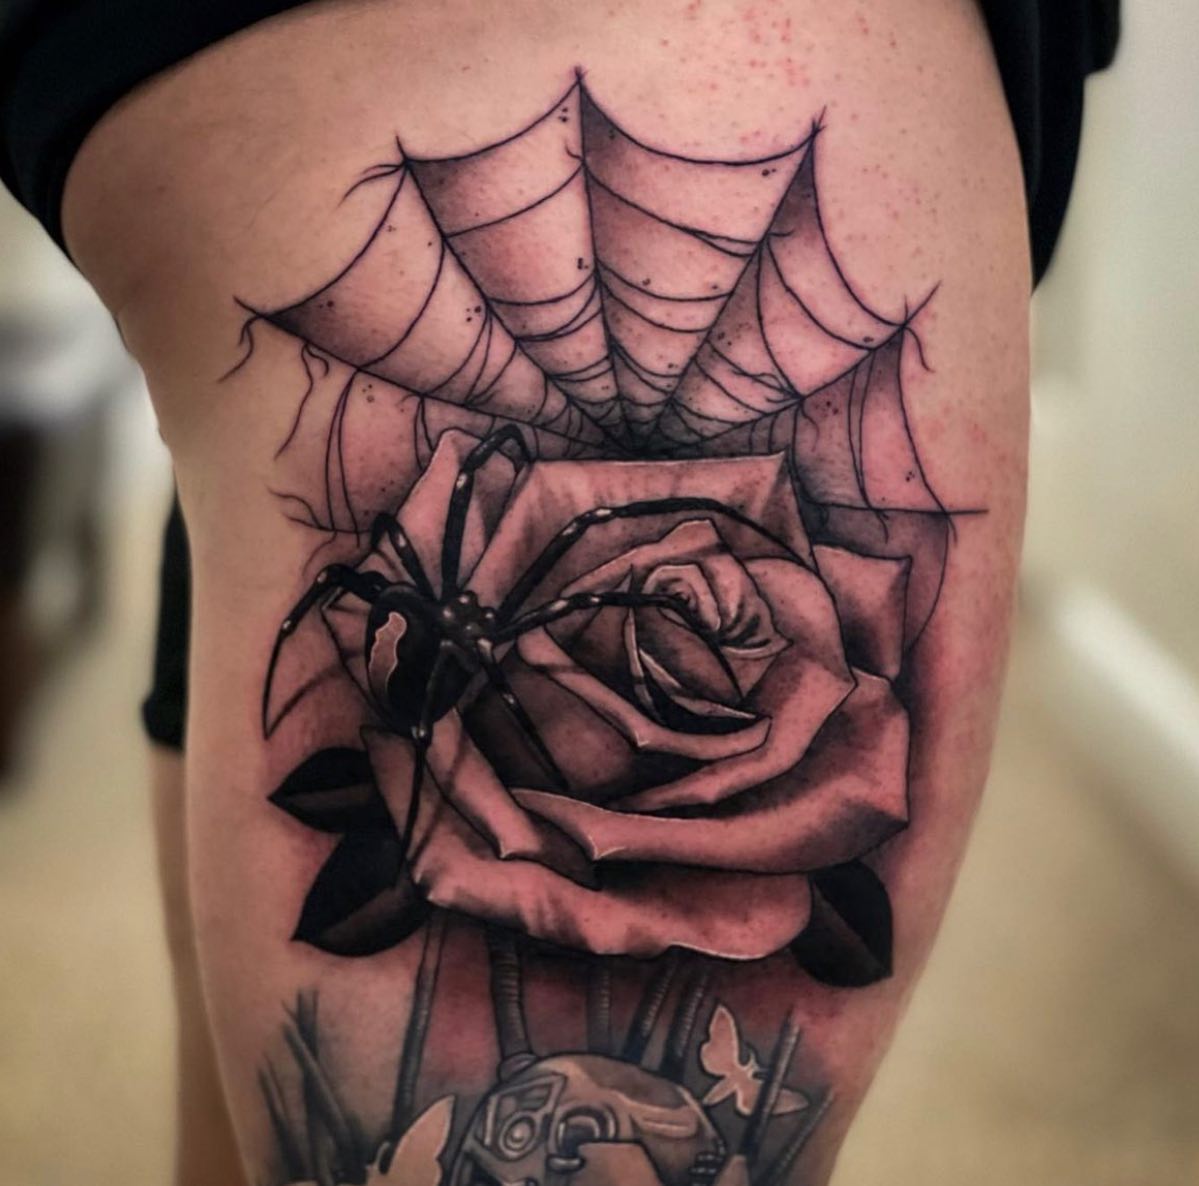 Try out a web tattoo and pair it with a rose design. This will show your true inner closeness and proper energy to your loved one.